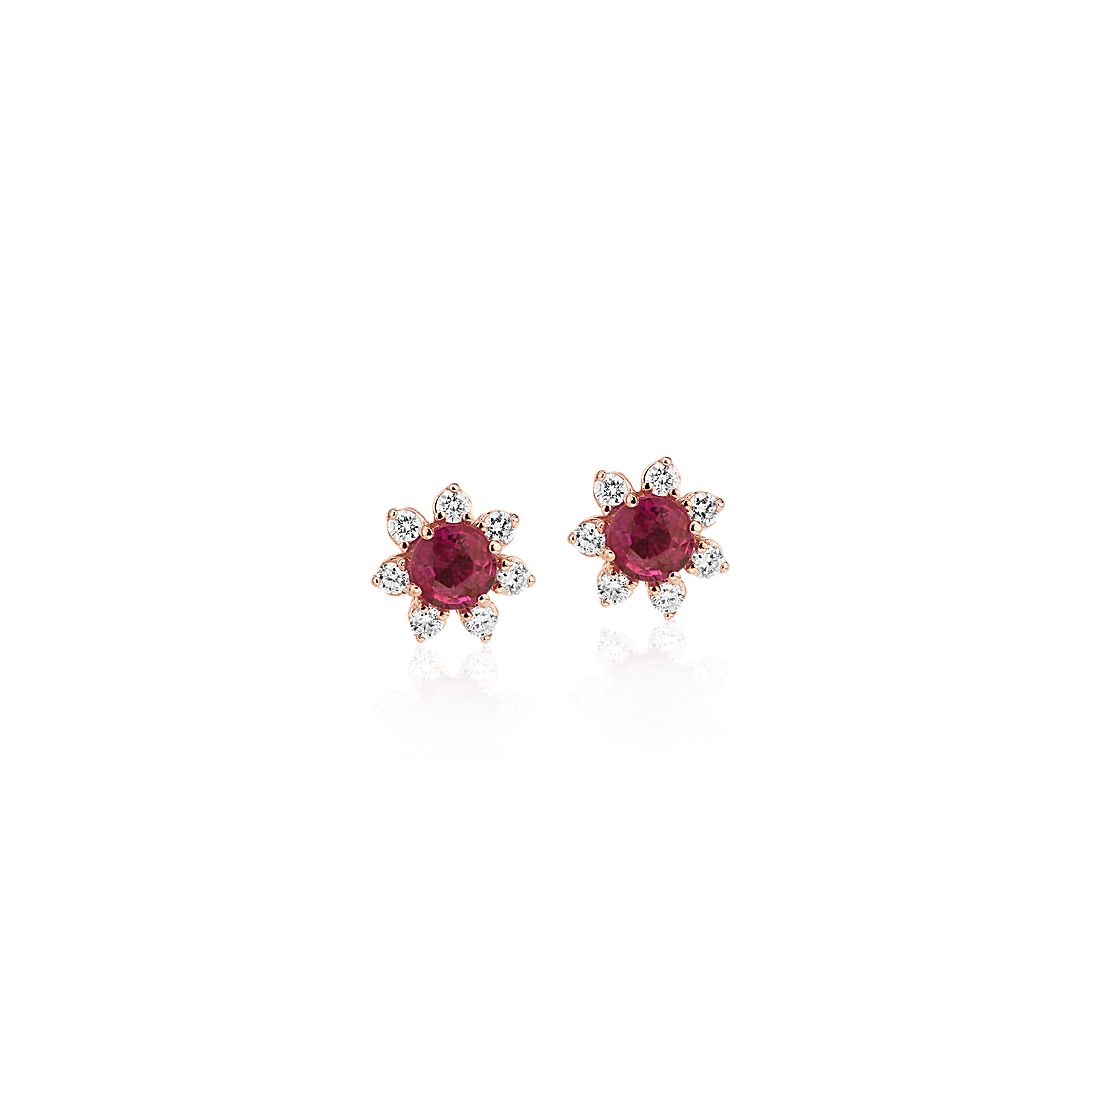 Sparkling Oval Red Ruby Earrings Women Wedding Jewelry 14K Rose Gold Plated